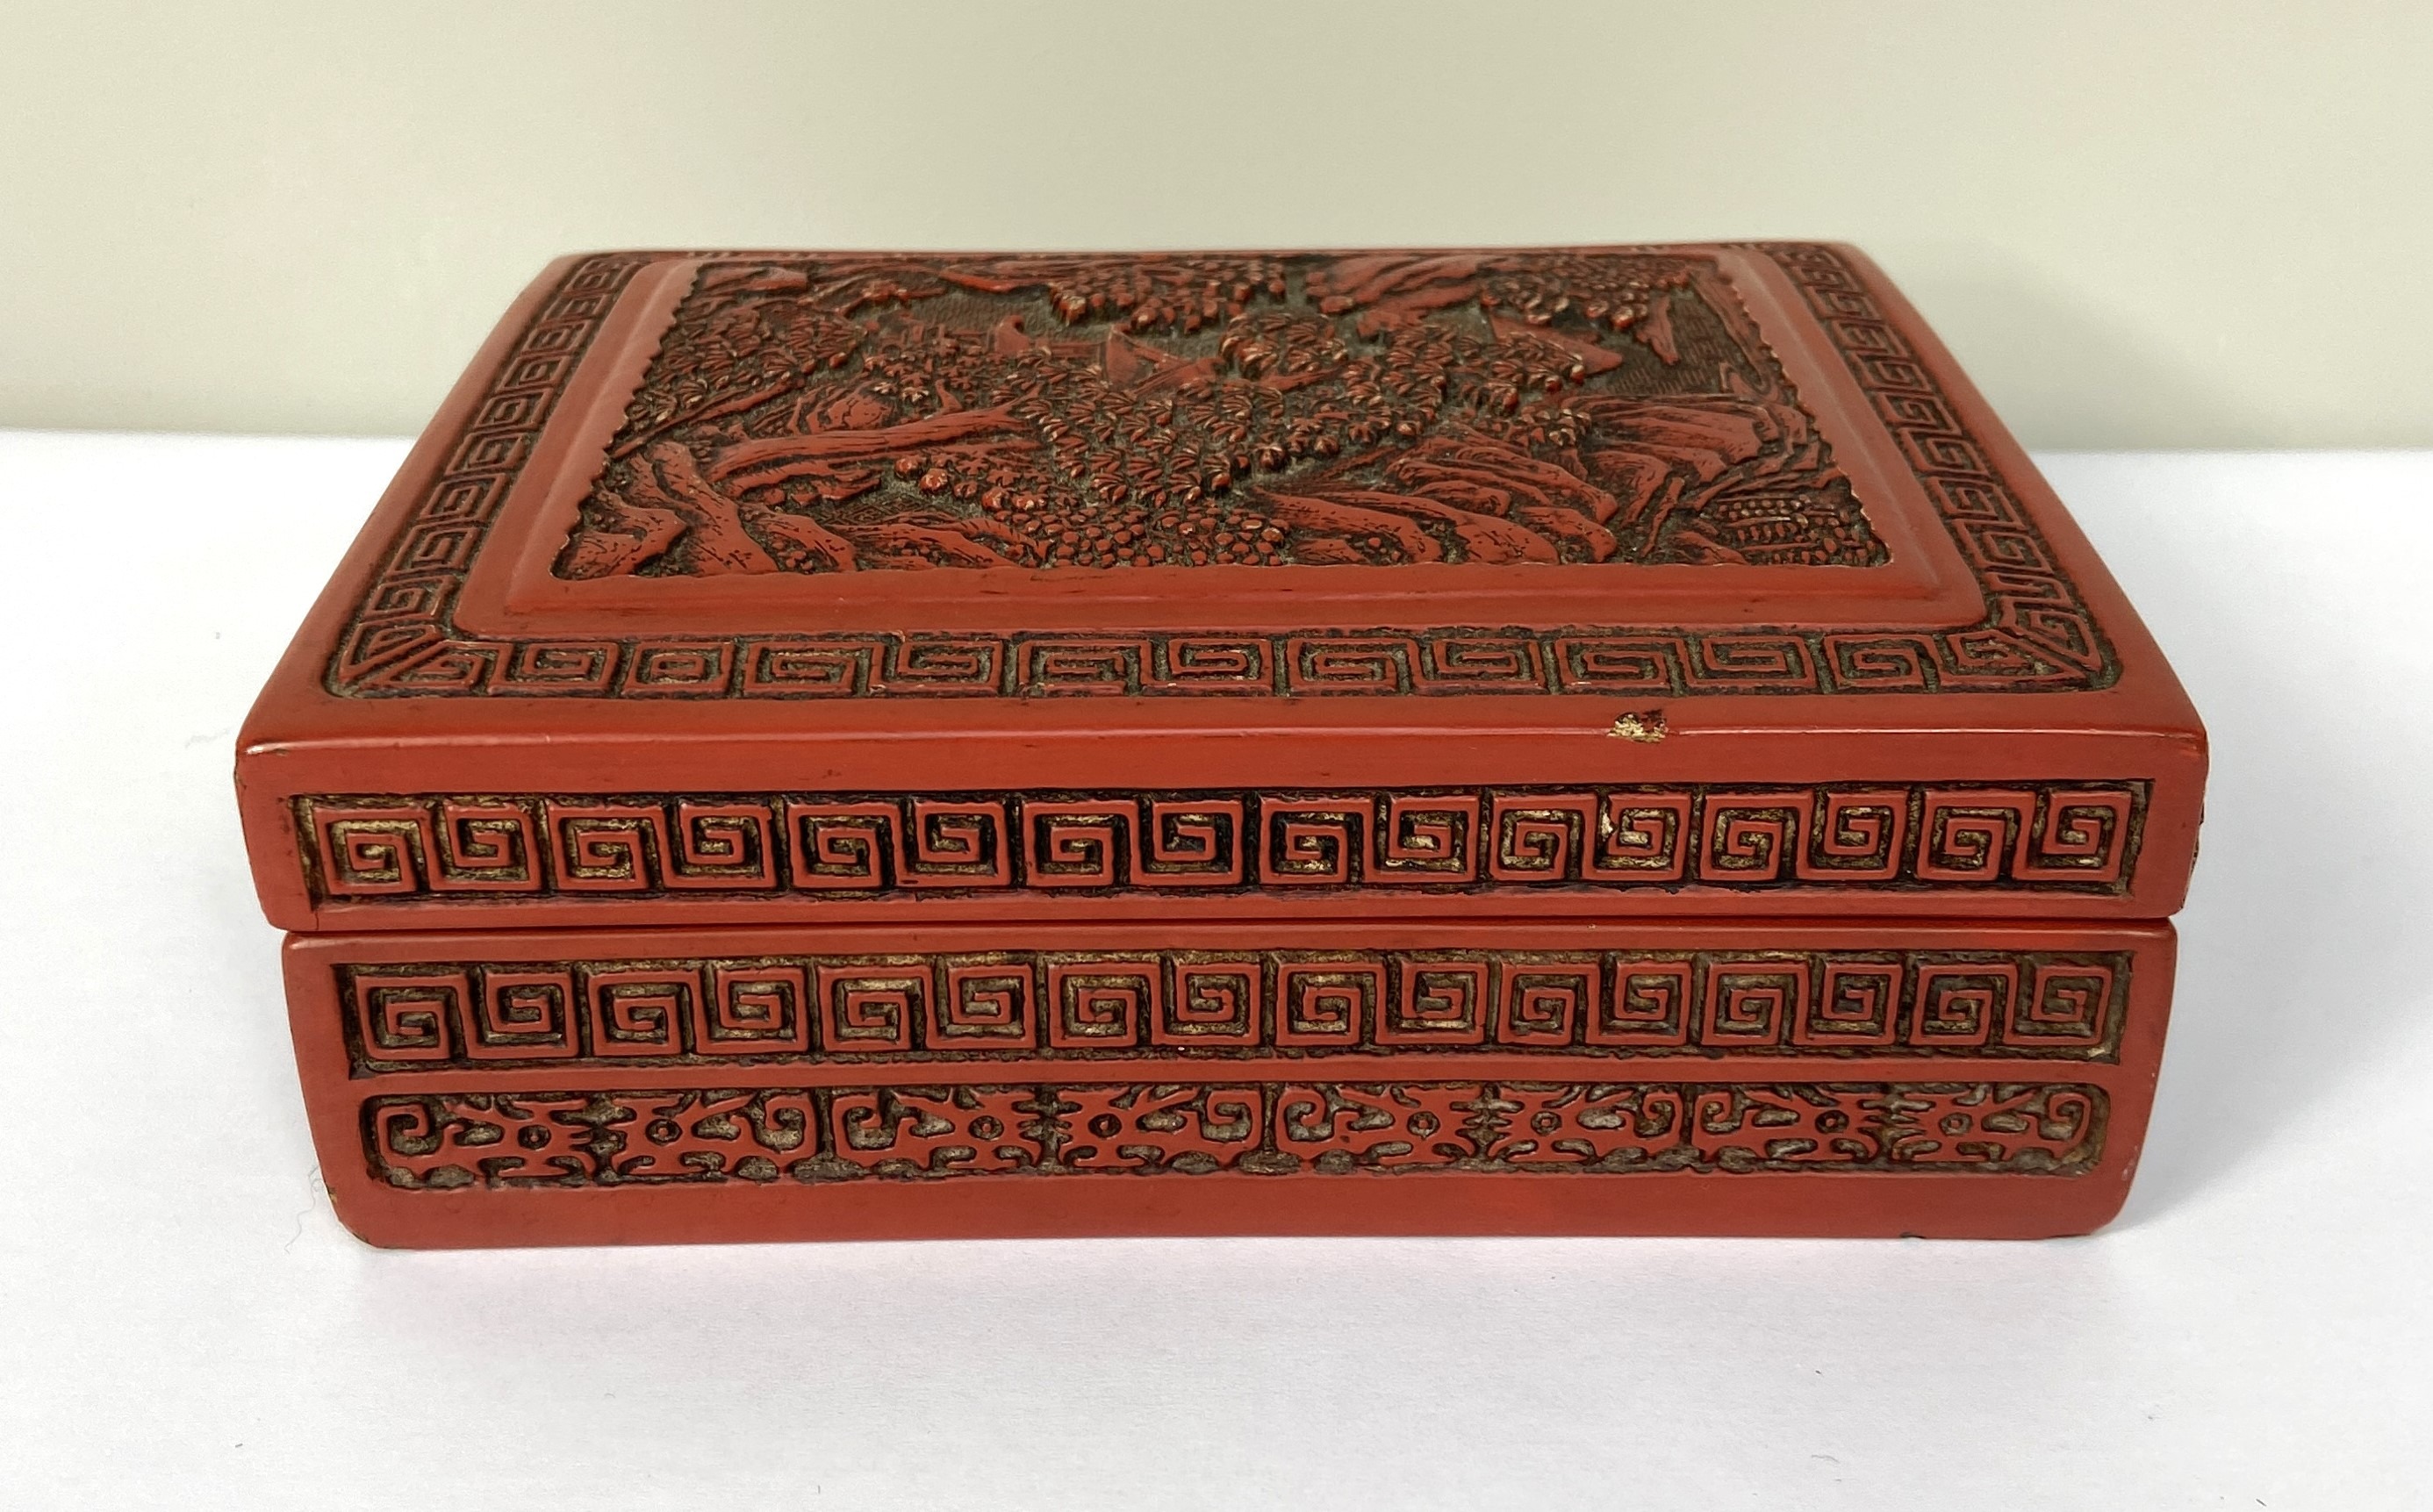 A Chinese export Cinnabar lacquered trinket box, 20th century, the top decorated with a tree lined